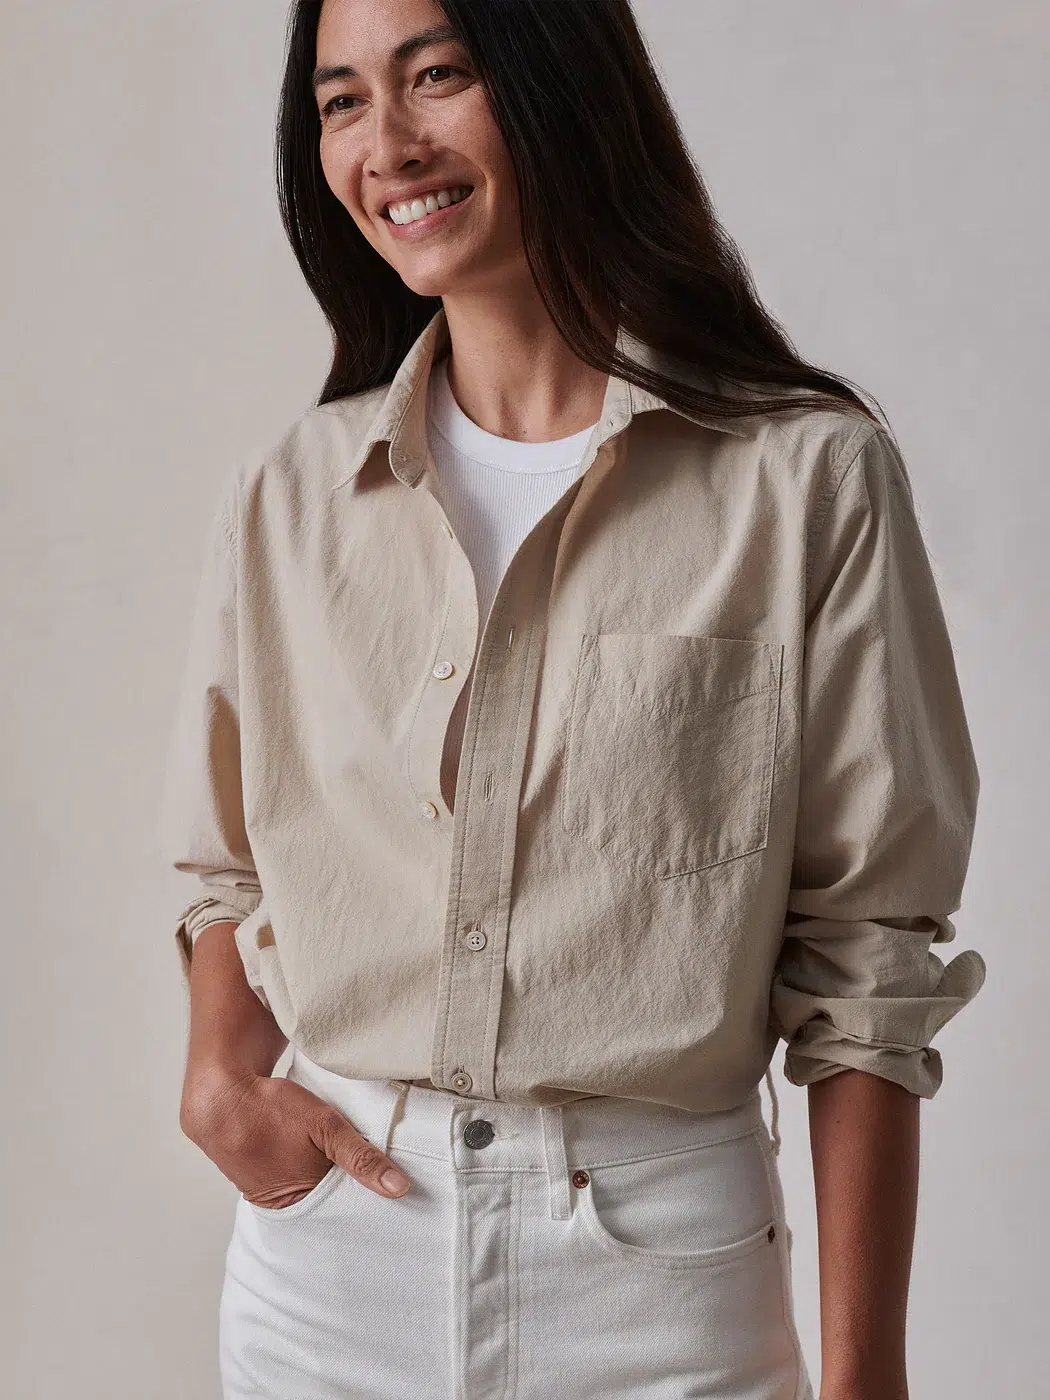 10 Sustainable Button Down Shirts For Women - The Good Trade